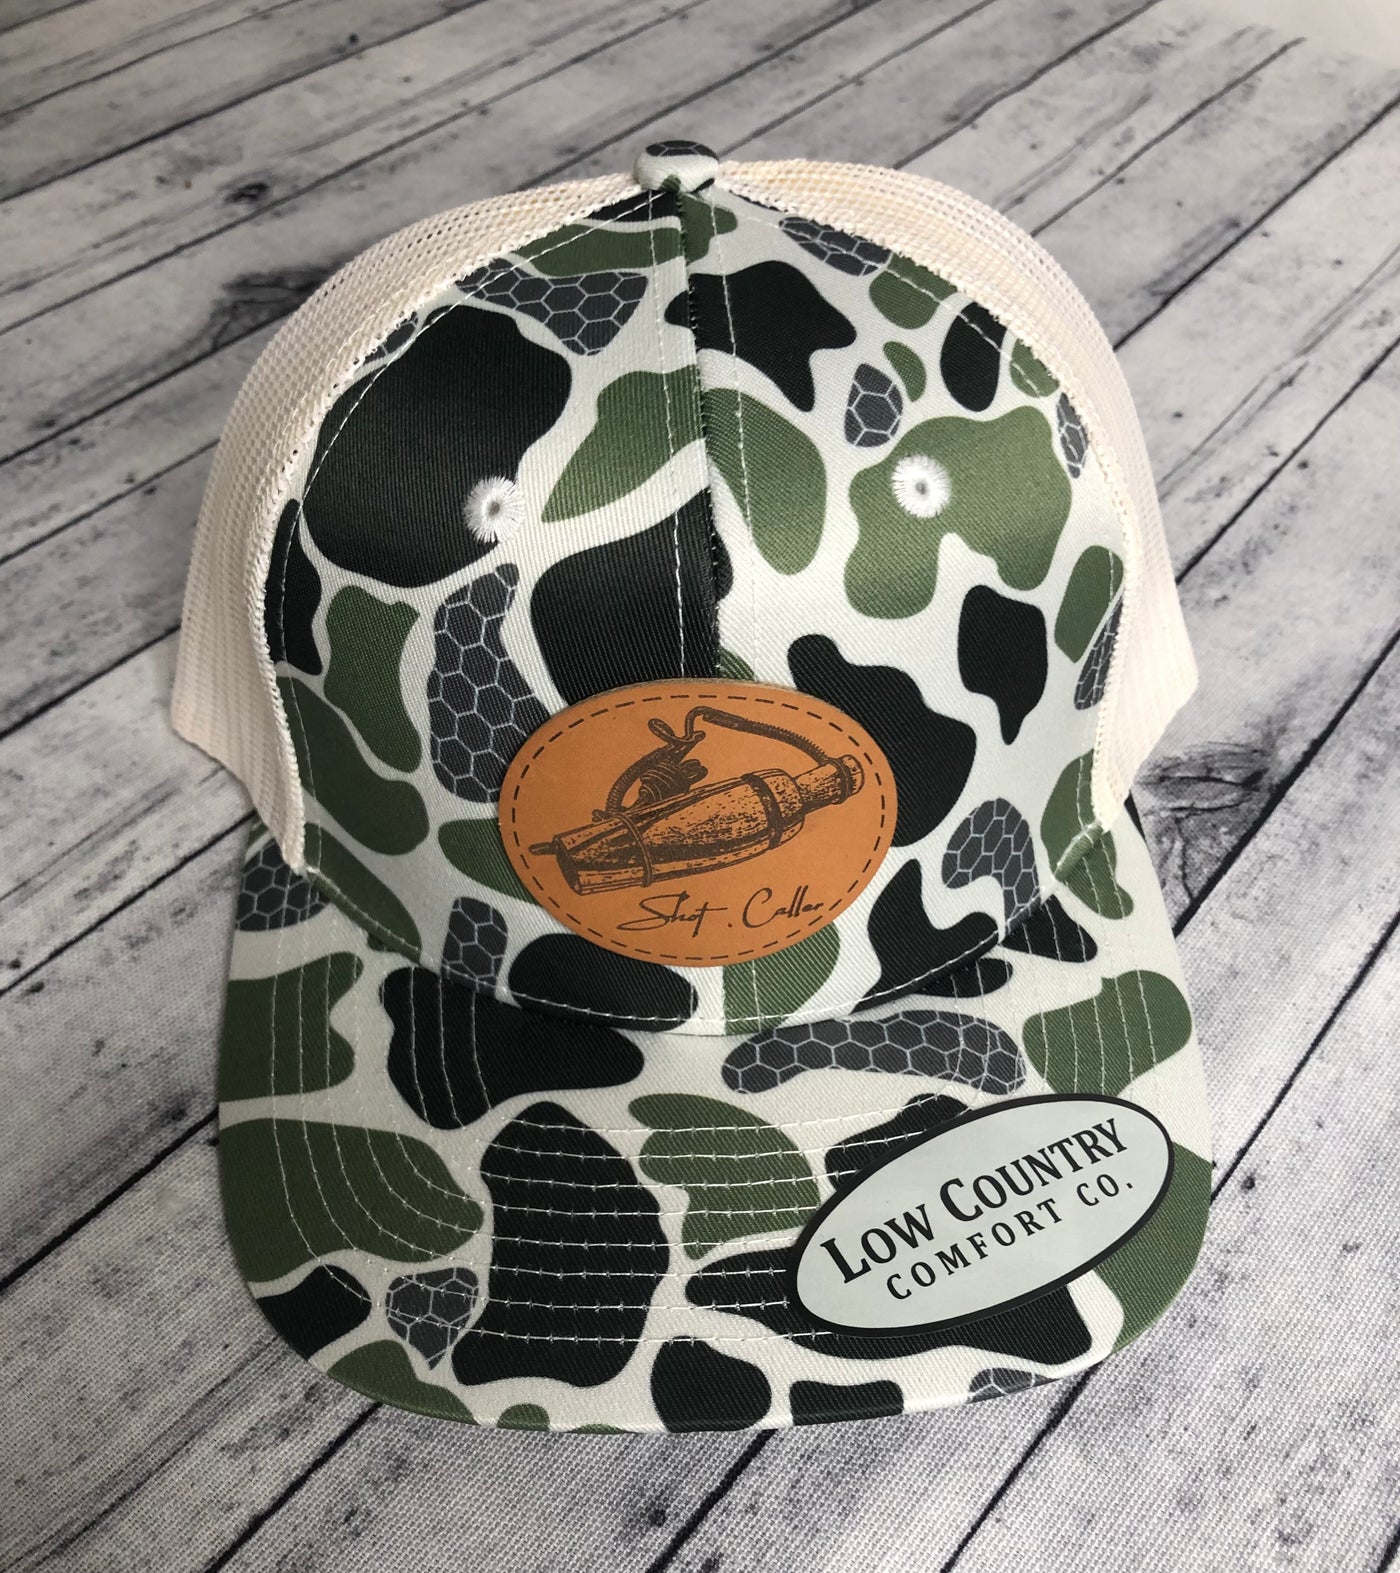 Low Country Comfort Co. Duck Call Patch Old School Camo/Khaki